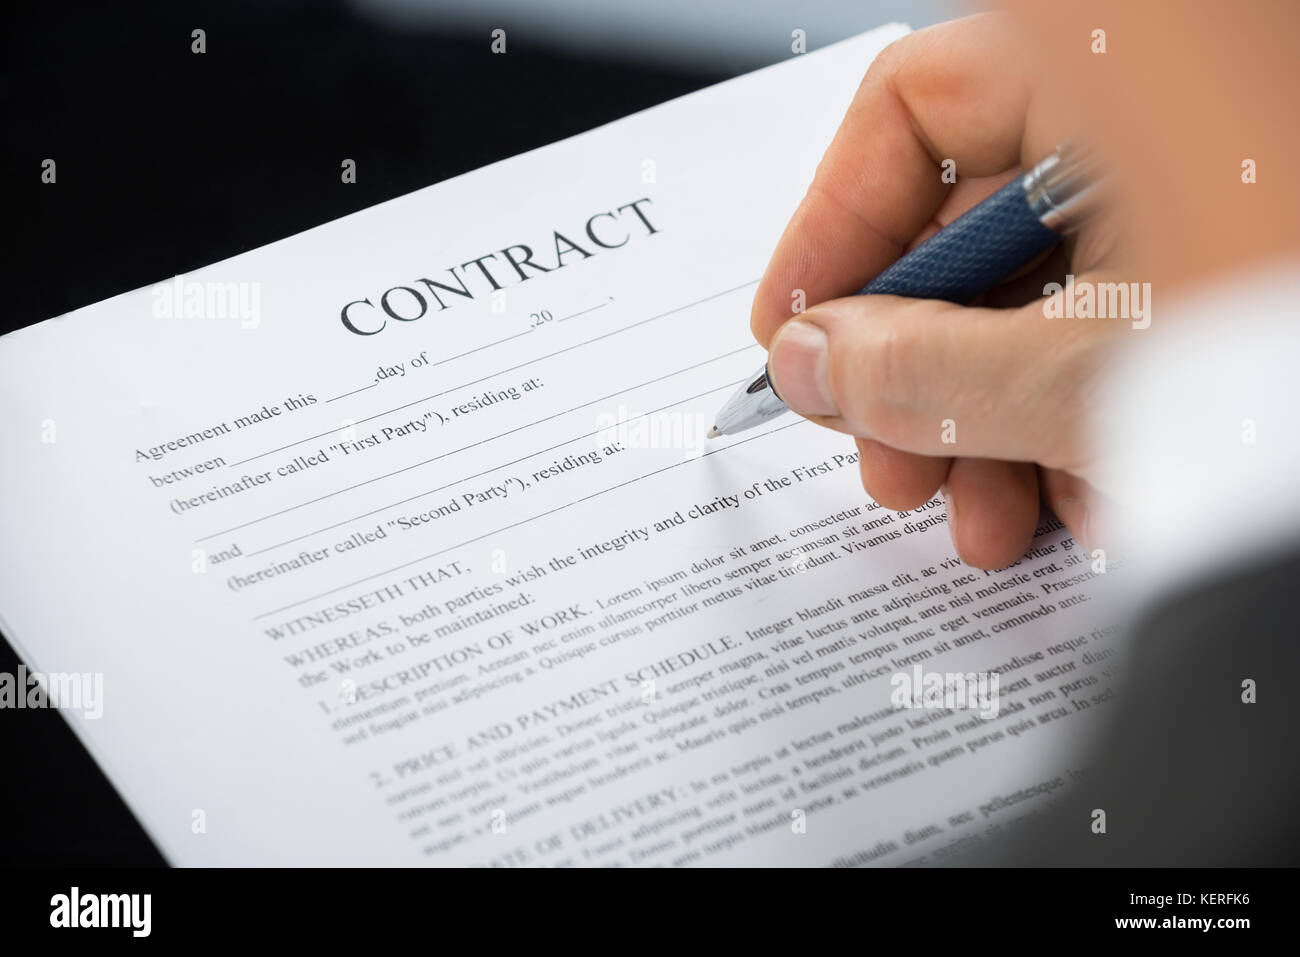 Close-up Of Businessman Hand Holding Pen Over Contract Form On Desk Stock Photo